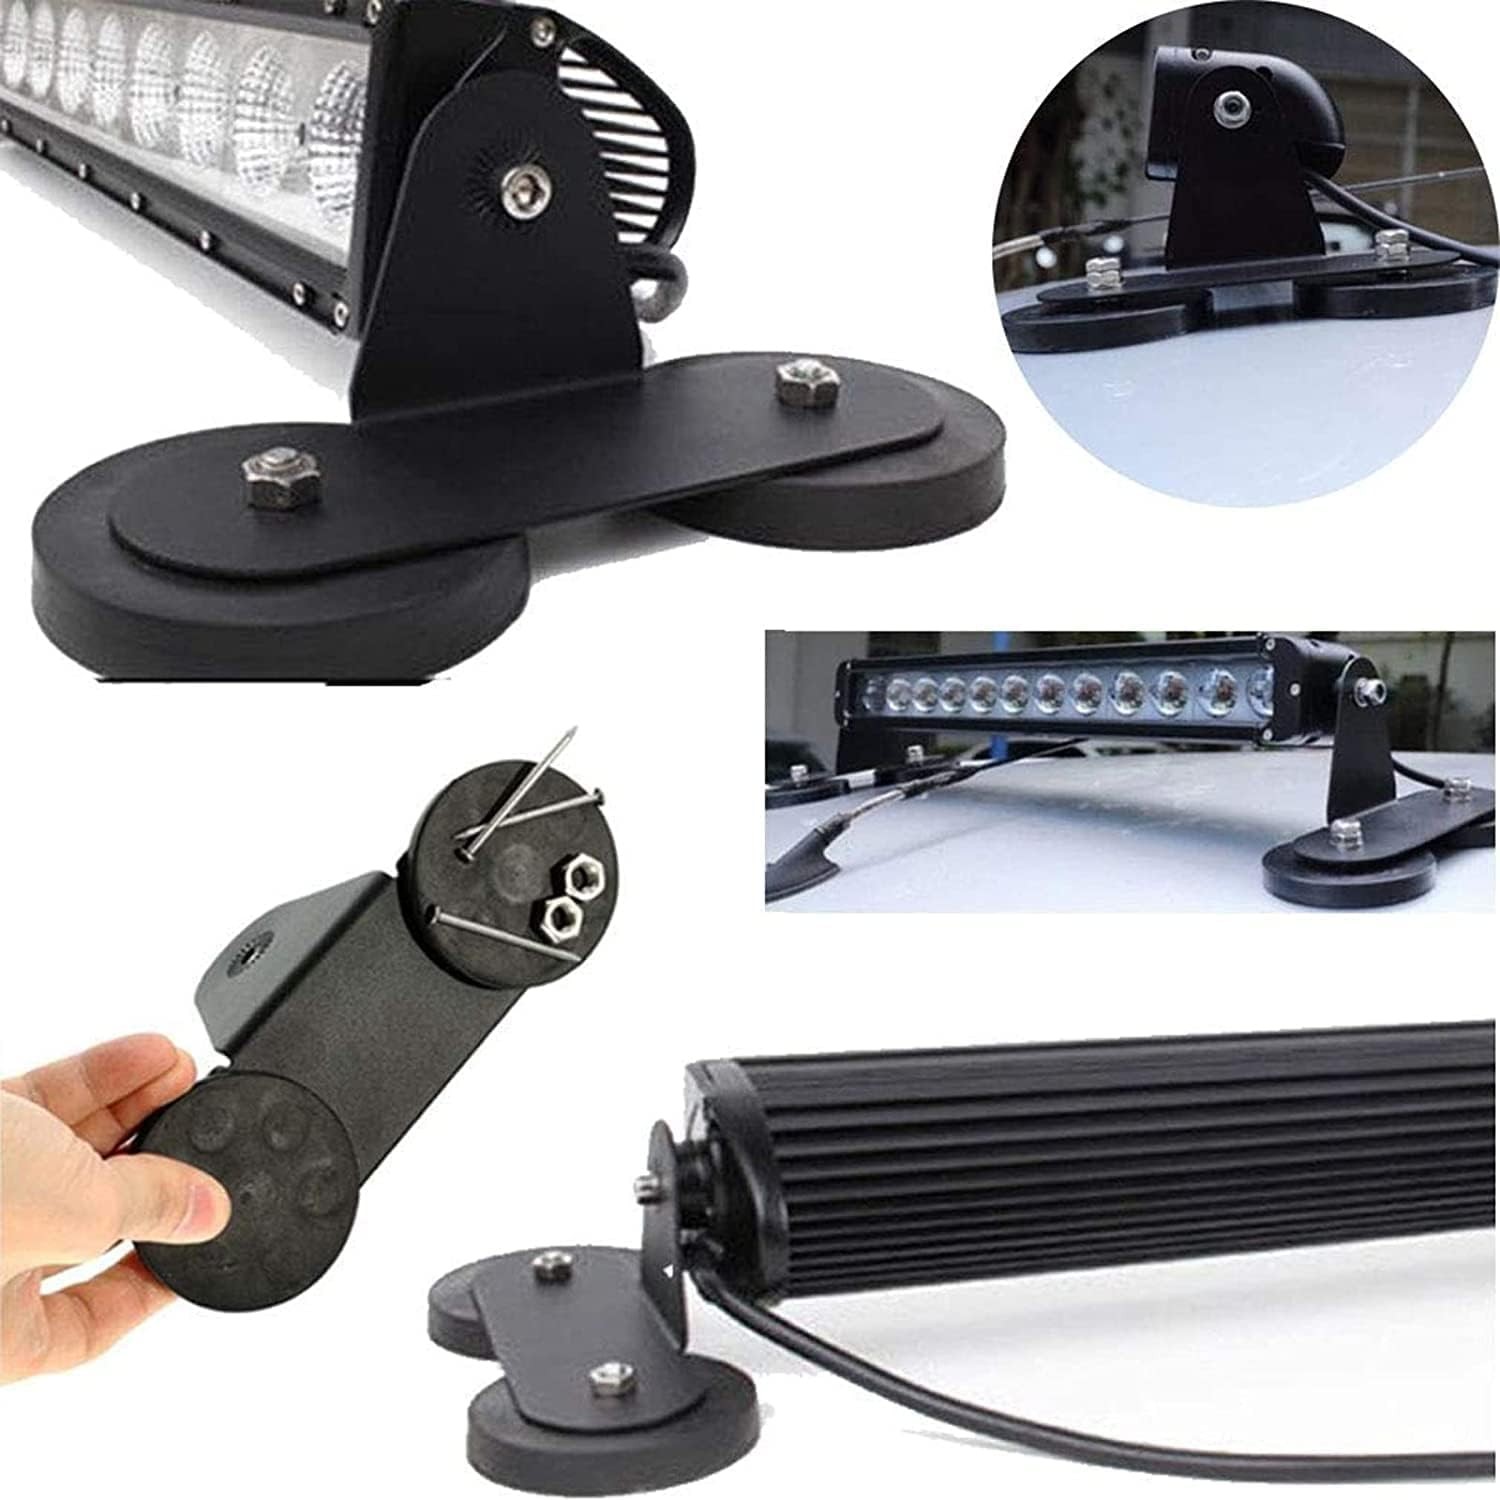 Strong Rubber coated magnetic mount for Lighting,Camera,Tools and equipement